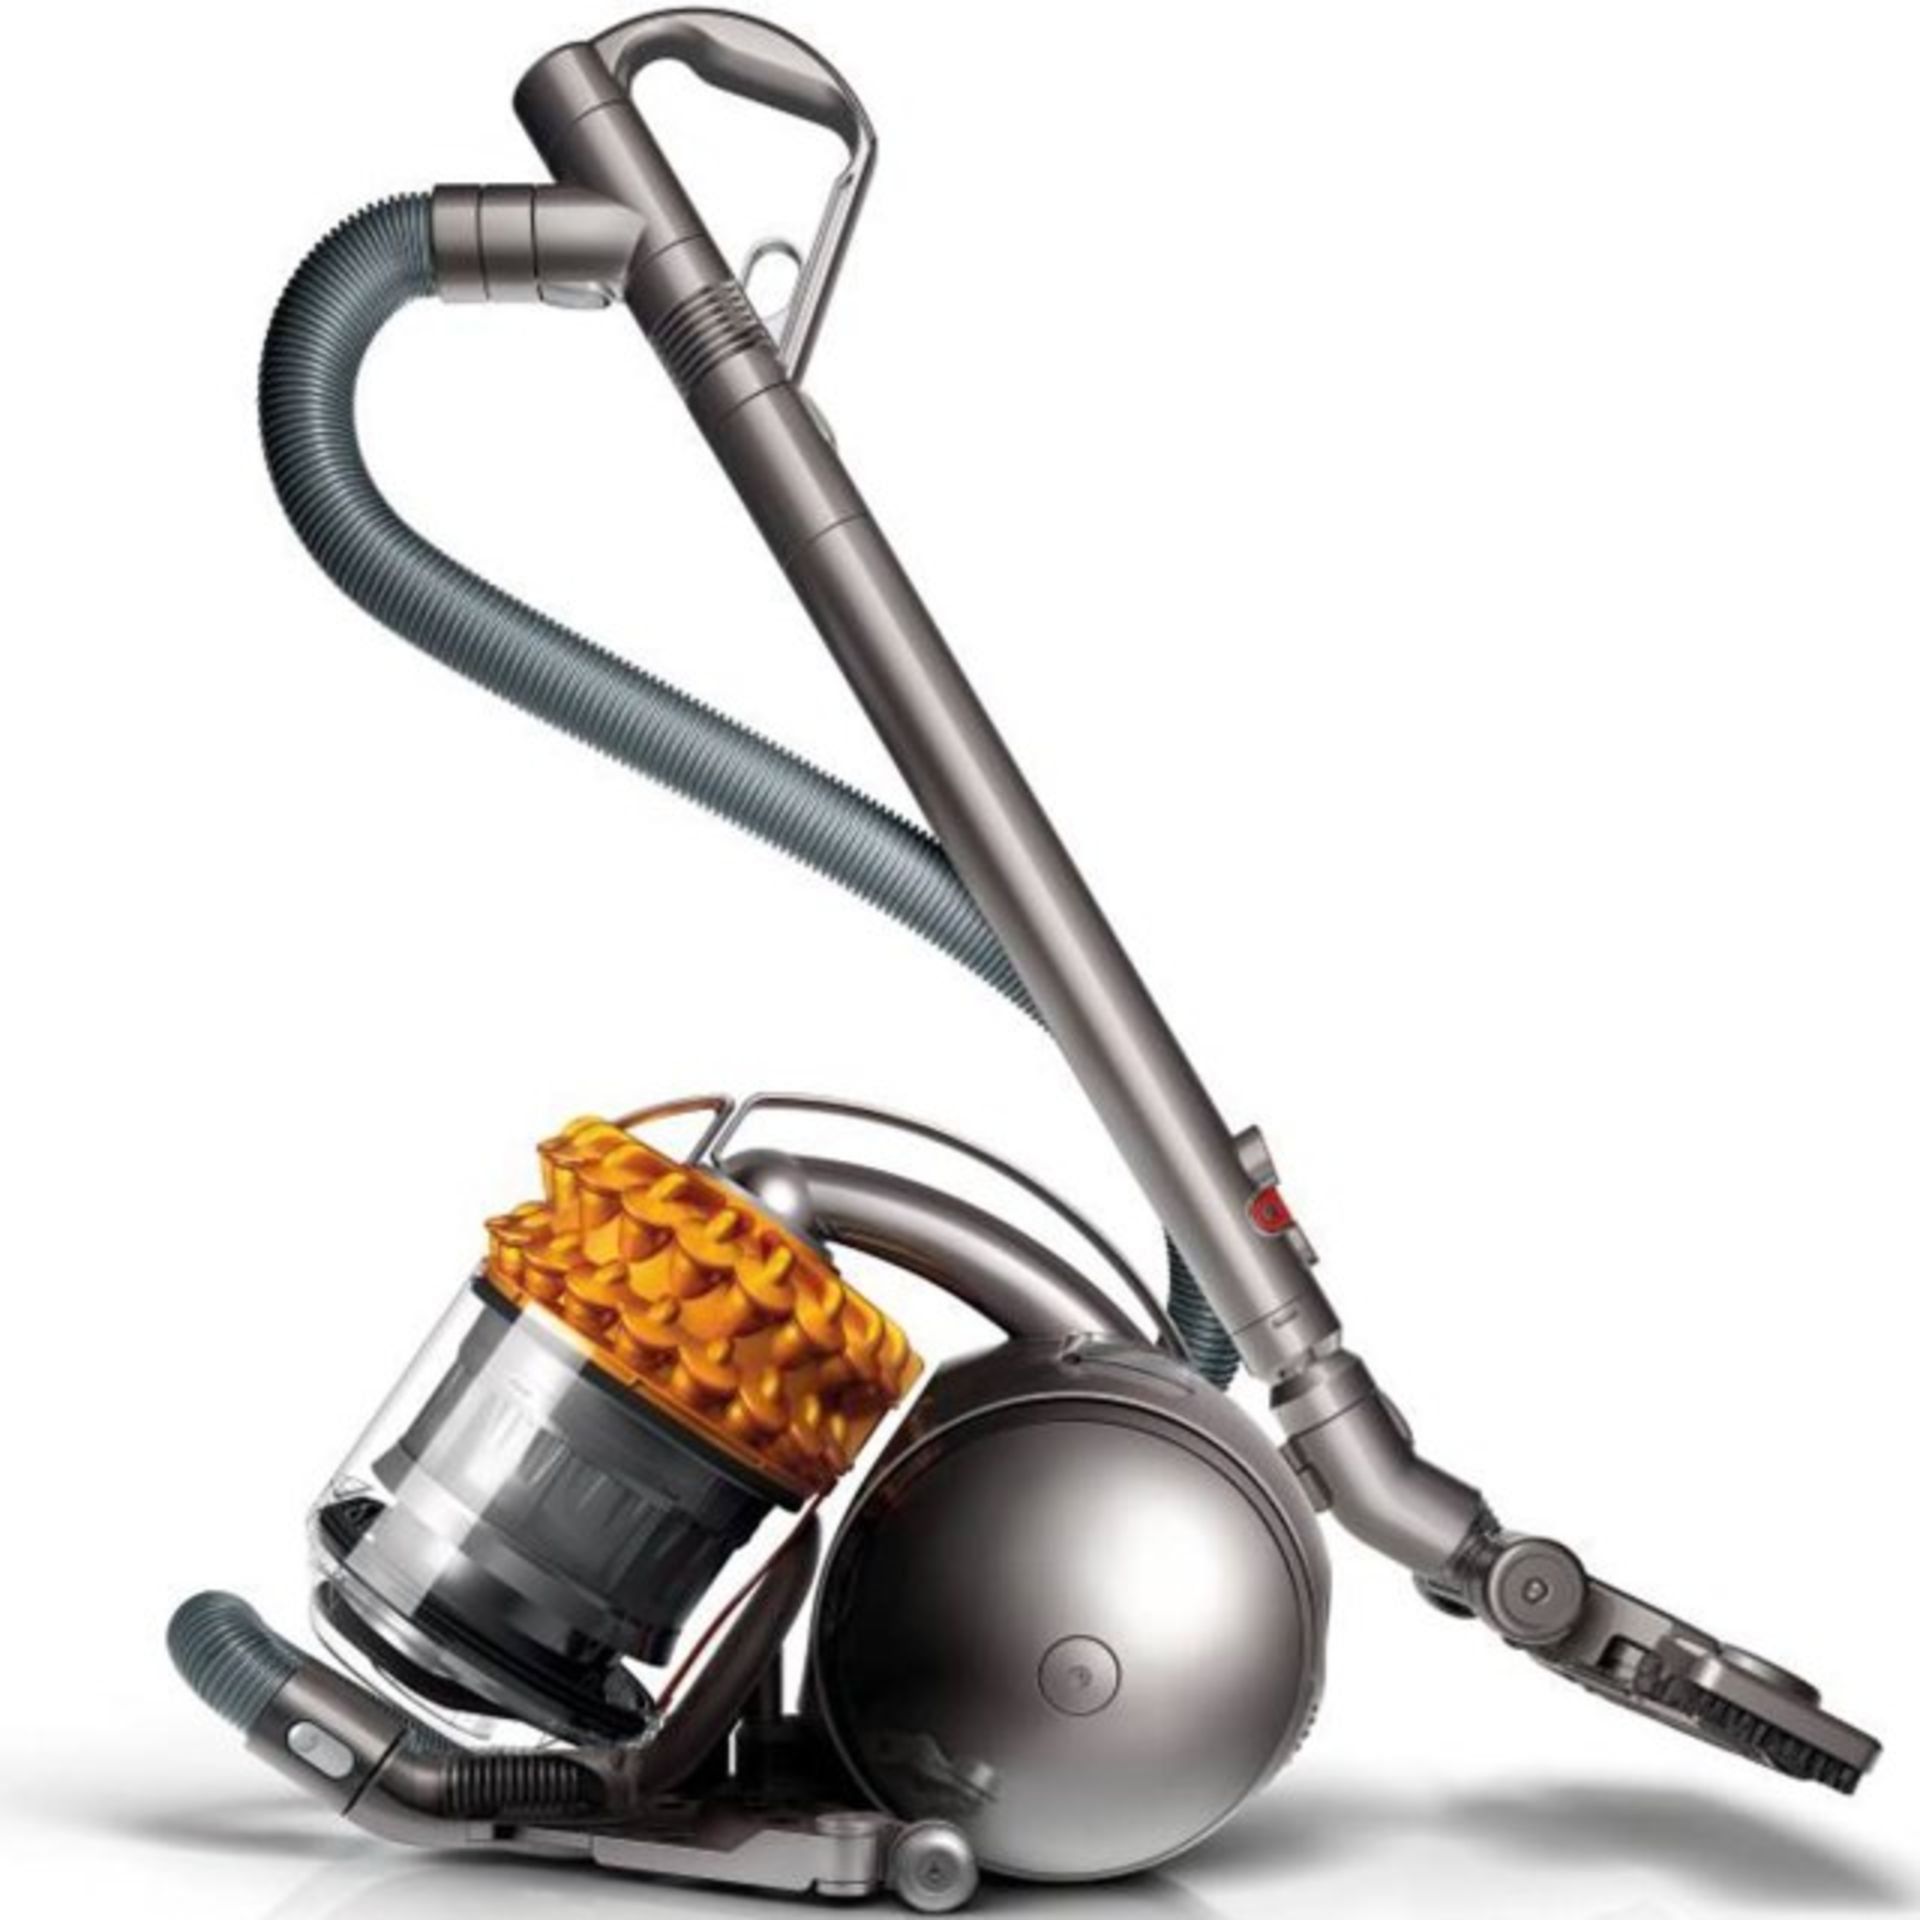 V Brand New Brand New Dyson DC54 Multi Floor Bagless Vacuum Cleaner RRP: £359.99 (Item Has 5 Year - Image 2 of 4